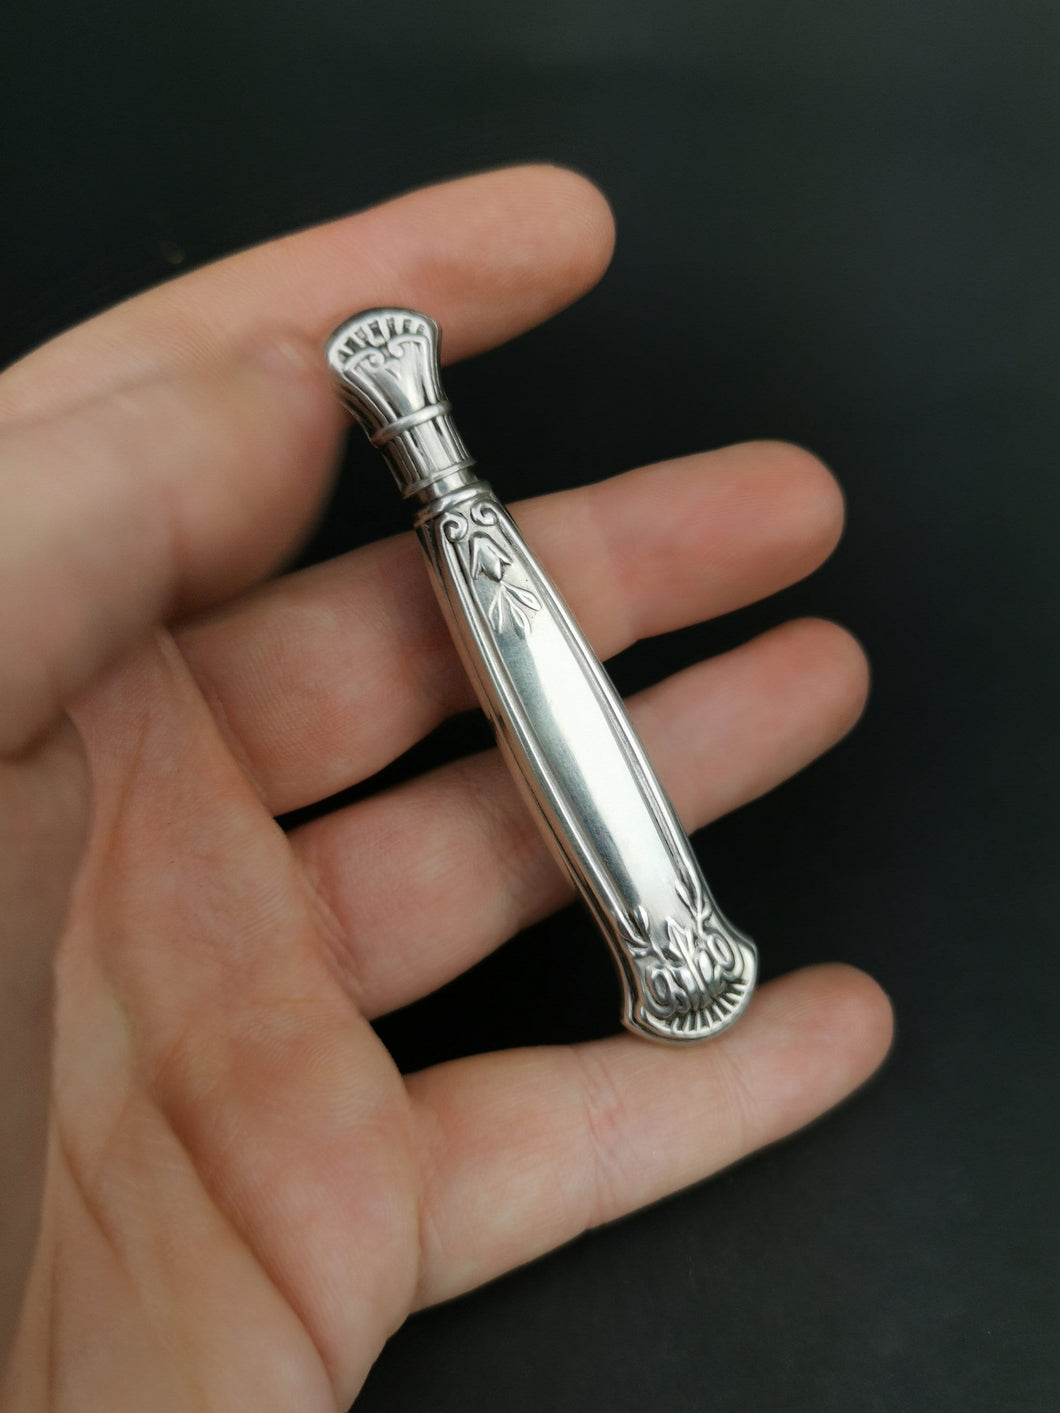 Antique Sterling Silver Needlecase Needle Case Holder Late 1800's Original Victorian